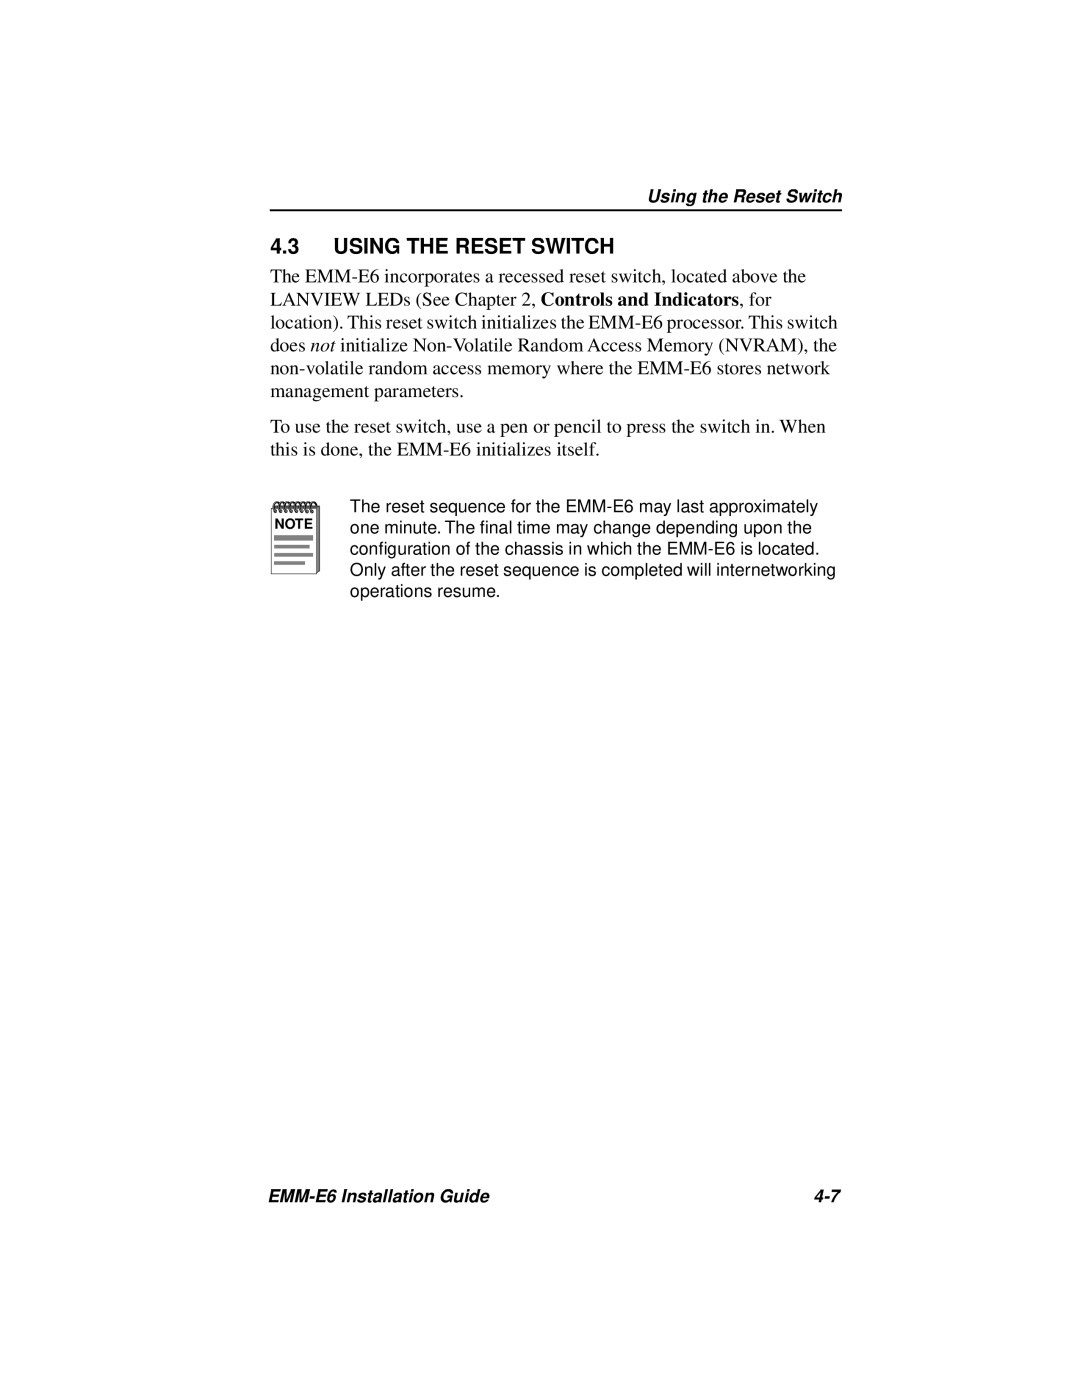 Cabletron Systems EMM-E6 manual Using The Reset Switch 